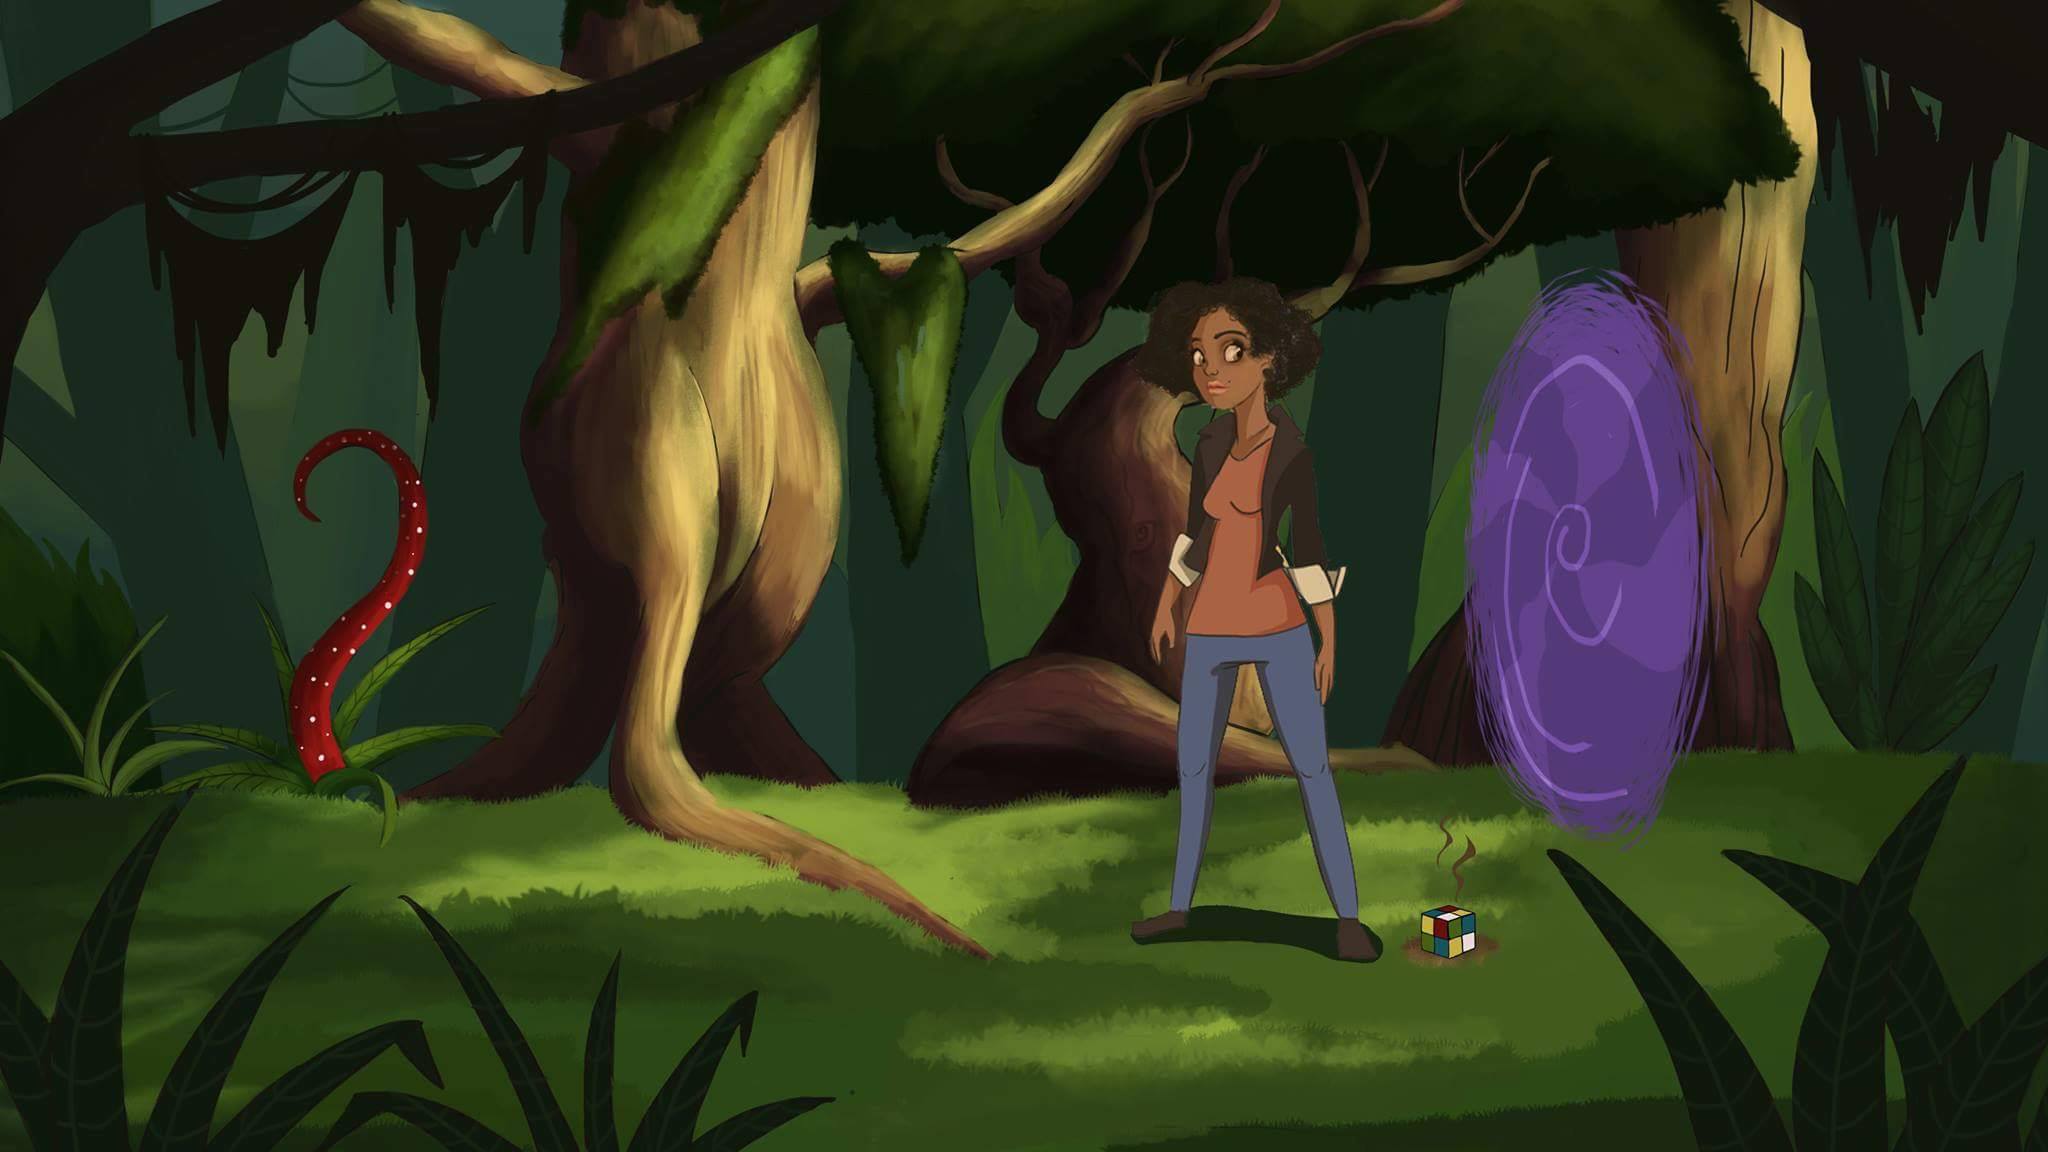 Vio in front of a portal in the woods